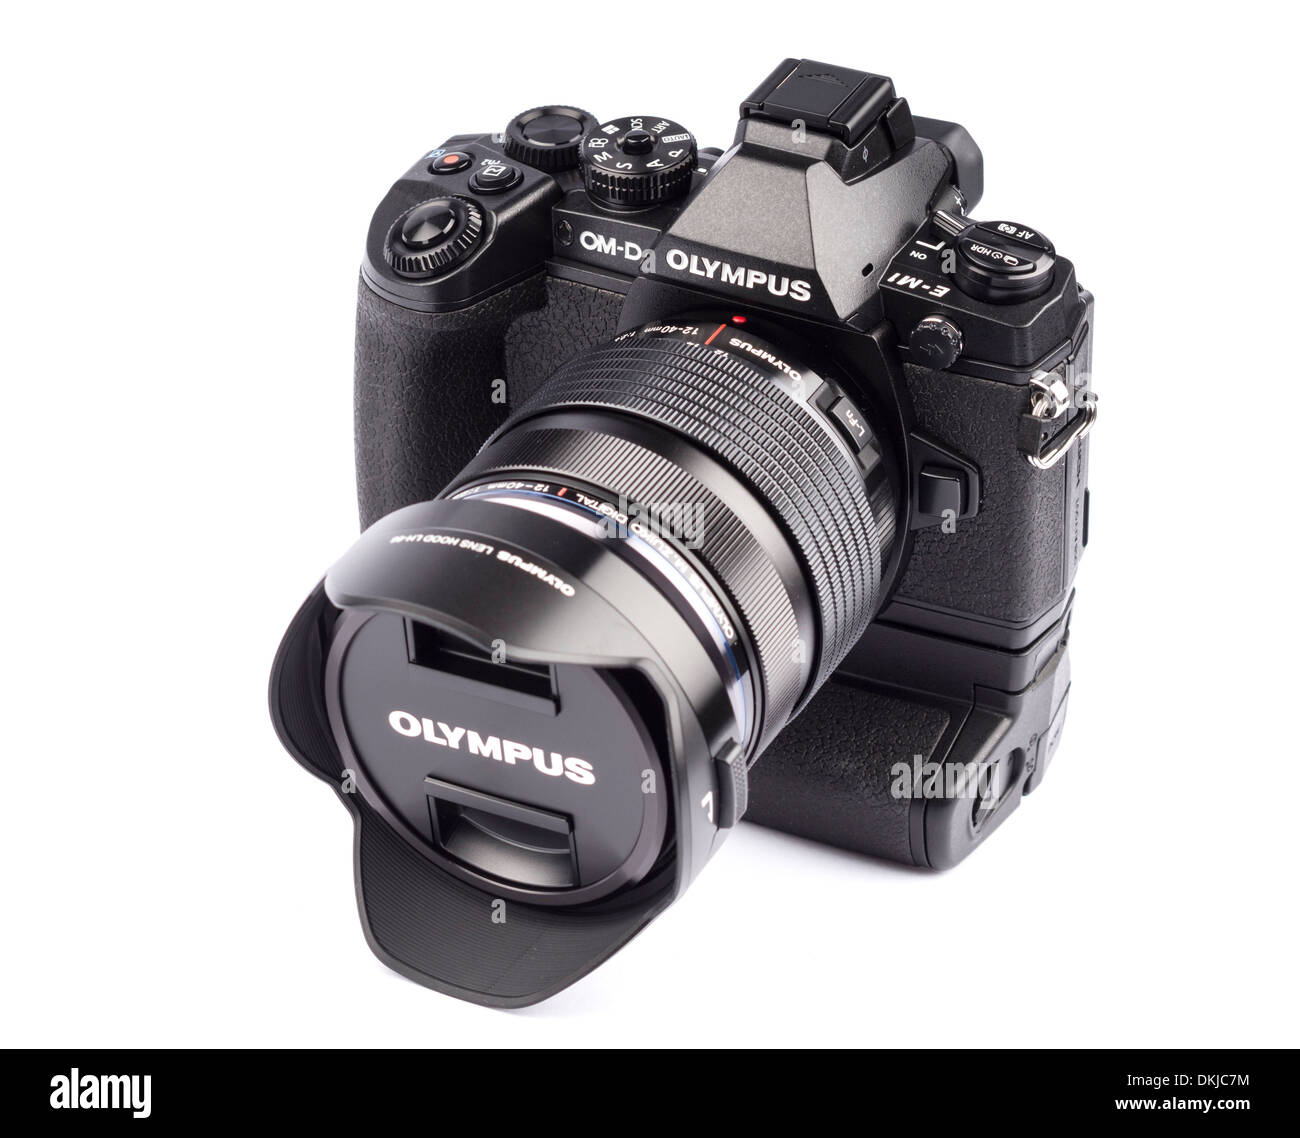 Olympus OM-D E-M1 digital mirrorless camera with HLD-7 vertical grip and 12-40mm f/2.8 pro zoom lens Stock Photo